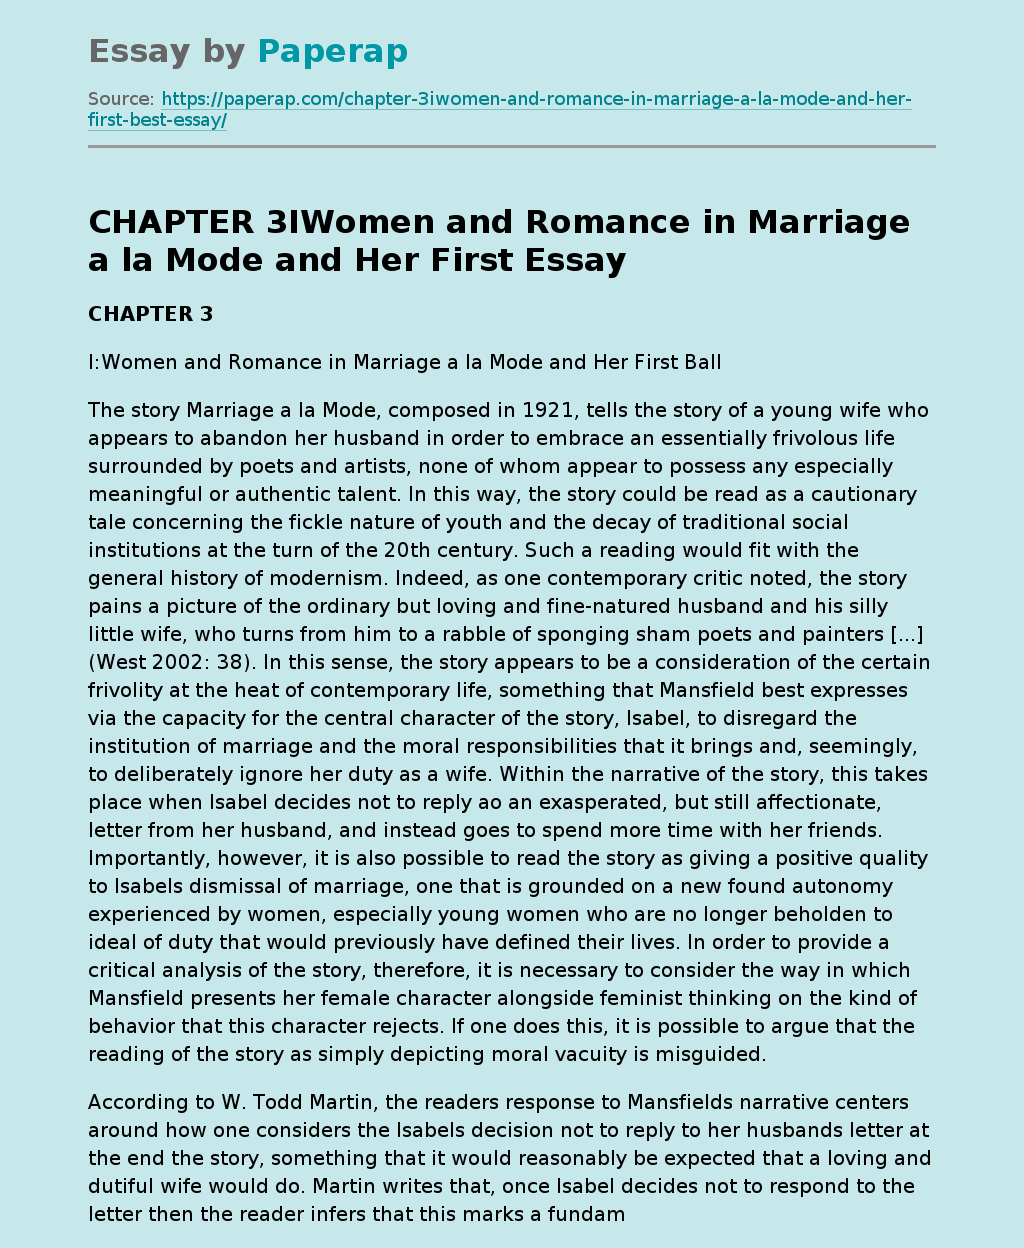 CHAPTER 3IWomen and Romance in Marriage a la Mode and Her First Best